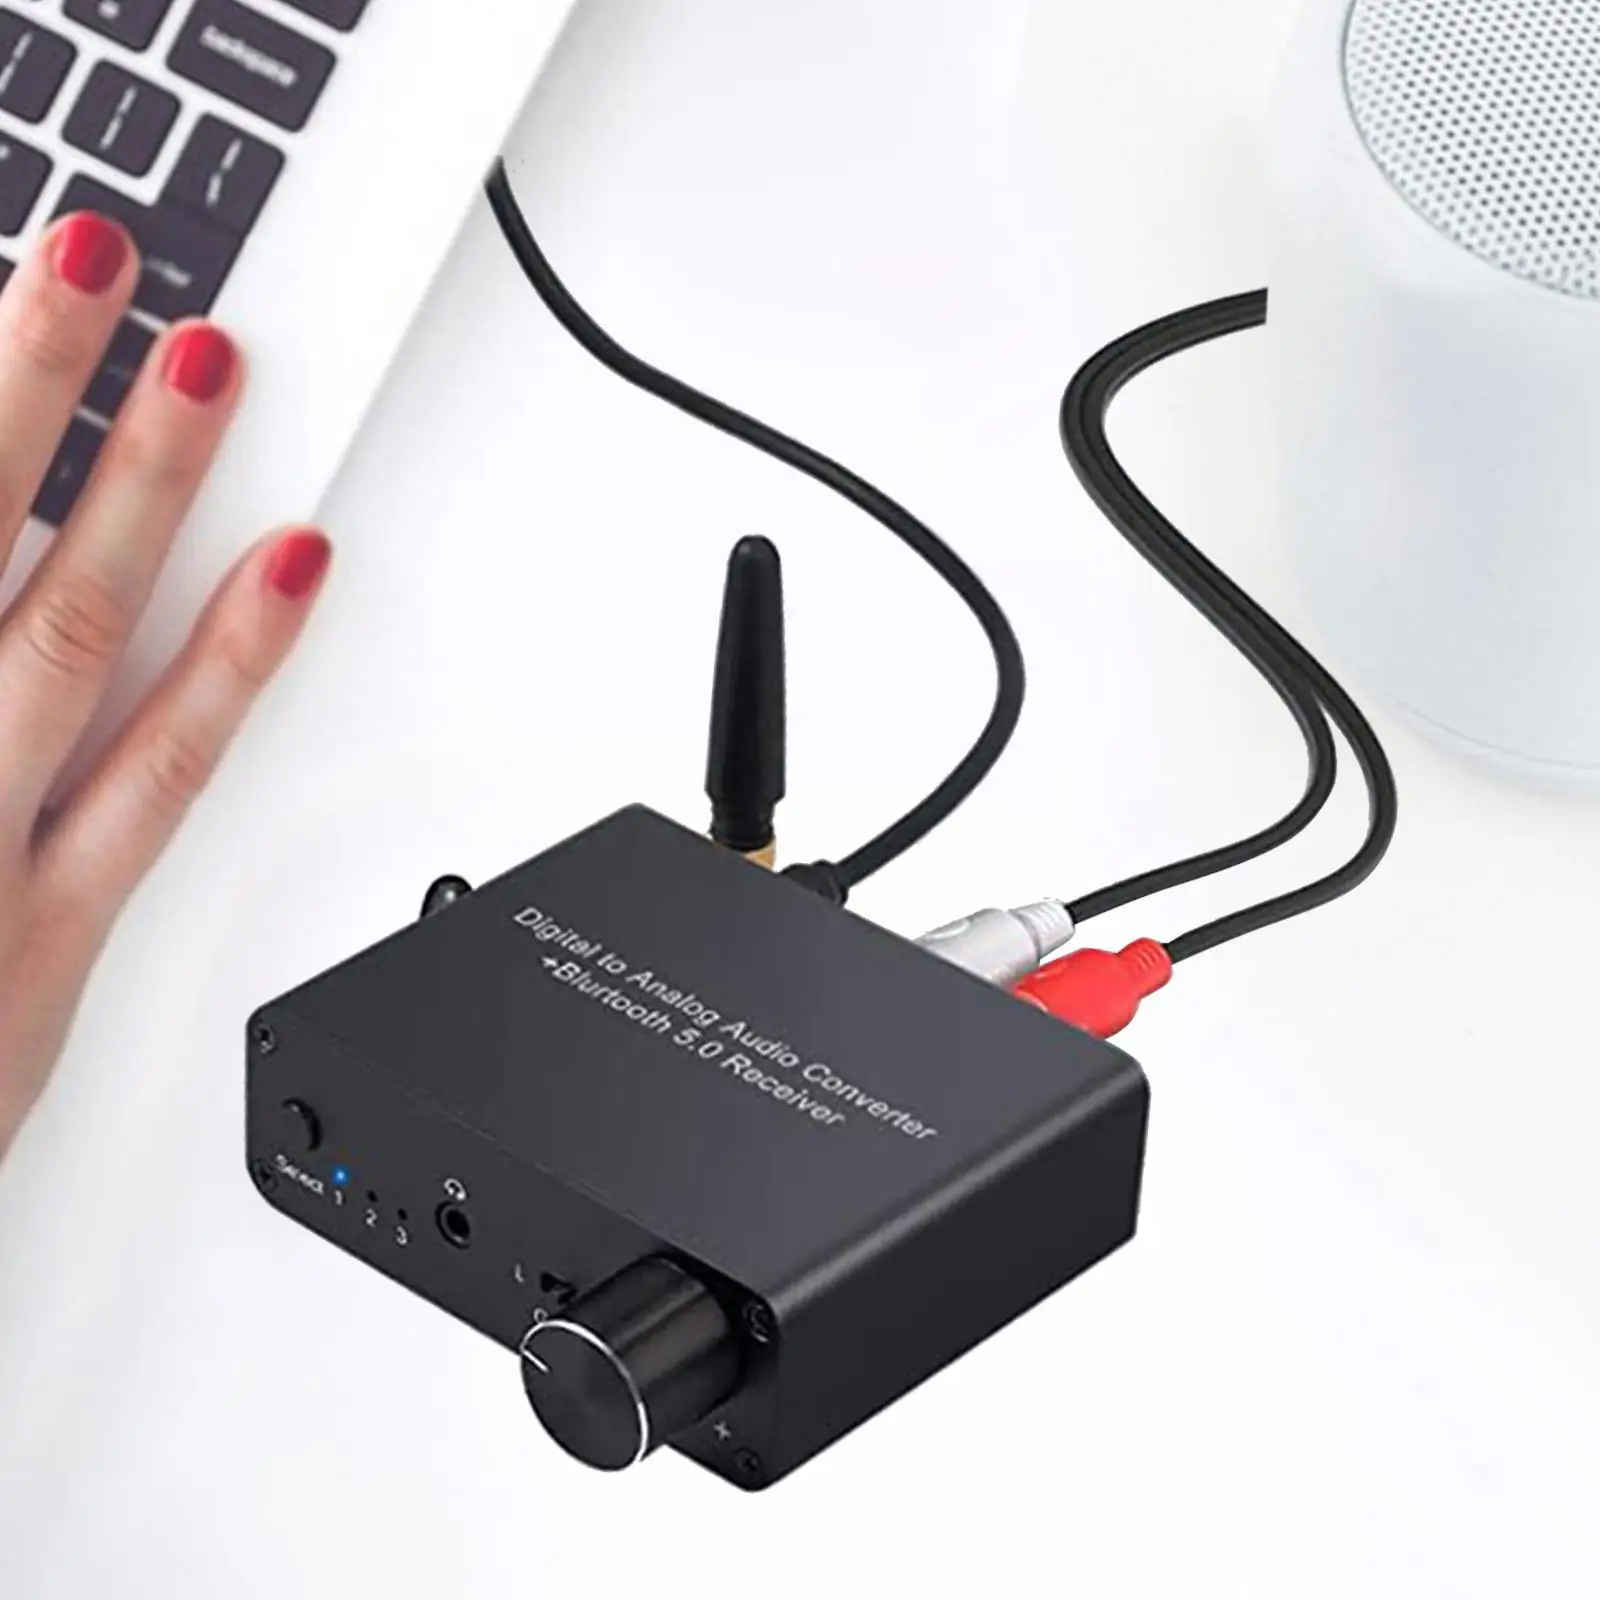 DAC 192KHz Digital to Analog Audio Converter Bluetooth 5.0 Receiver Low Latency Audio Adapter DAC Converter for Phone Tablet PC